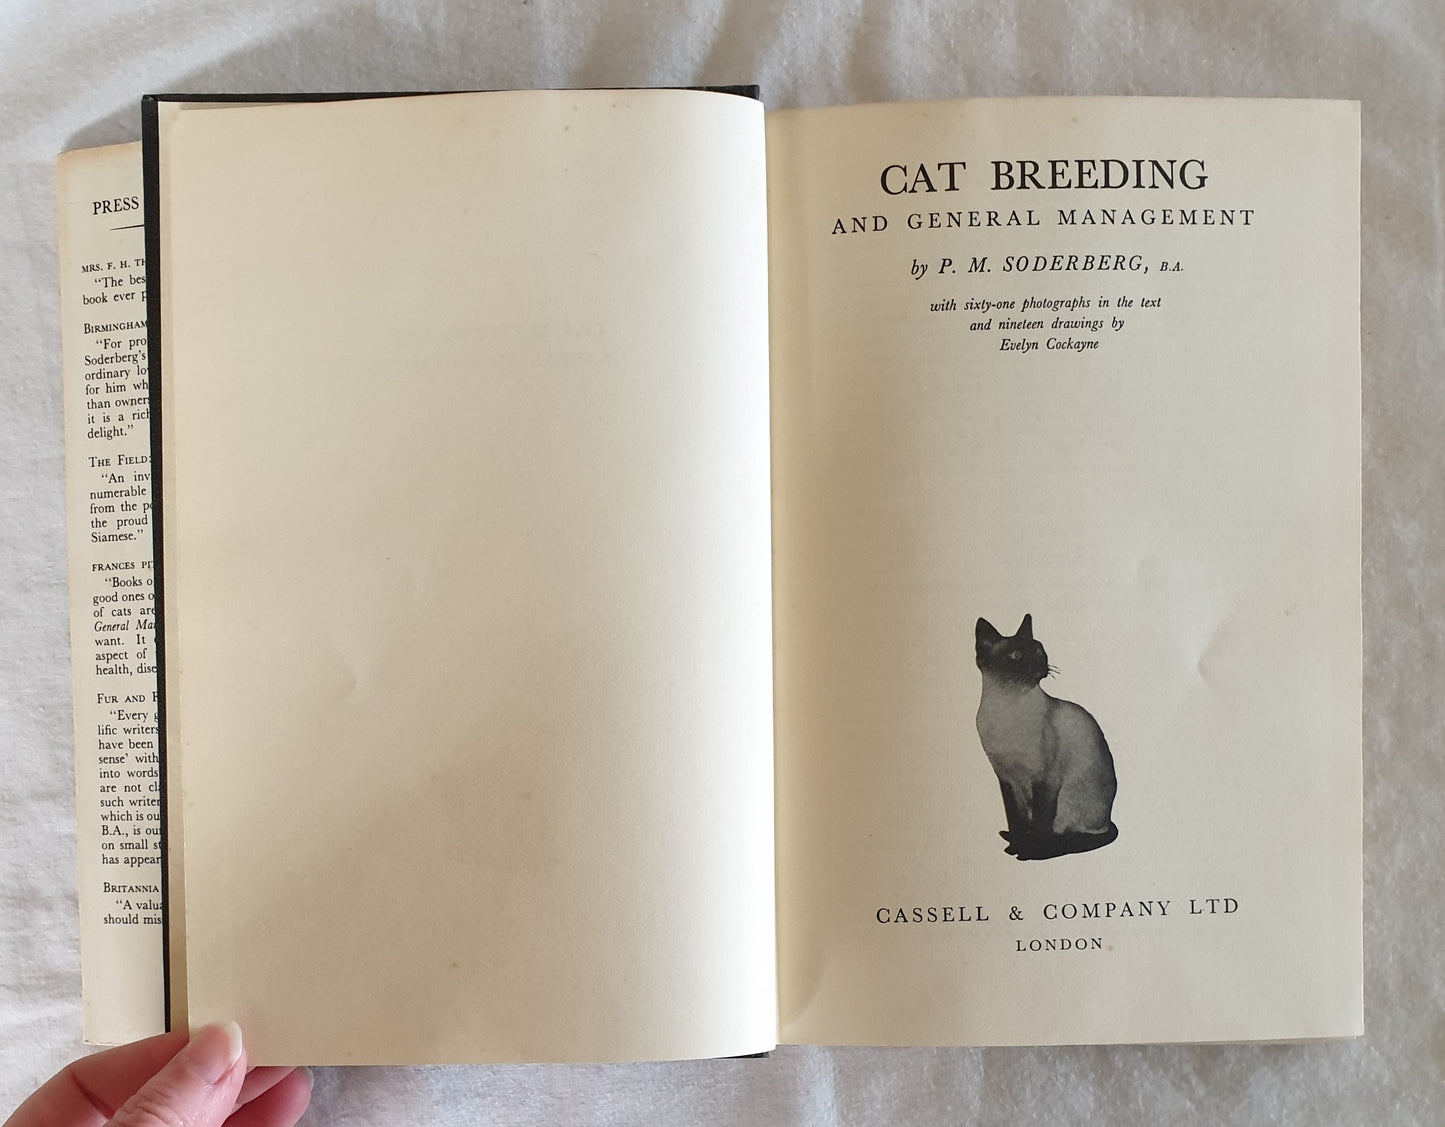 Cat Breeding and General Management by P. M. Soderberg